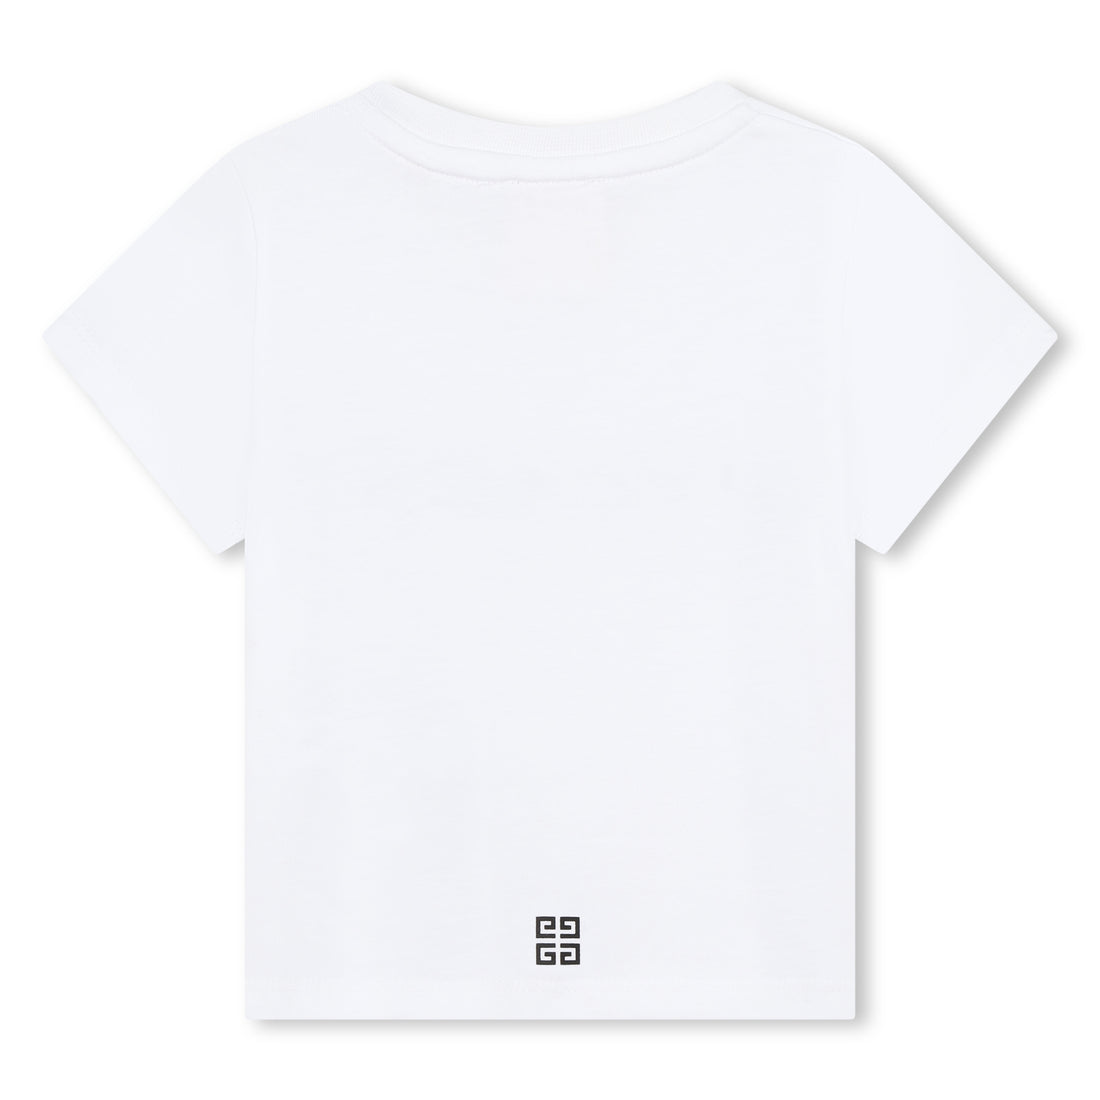 Givenchy Short Sleeves Tee-Shirt Stone | Schools Out